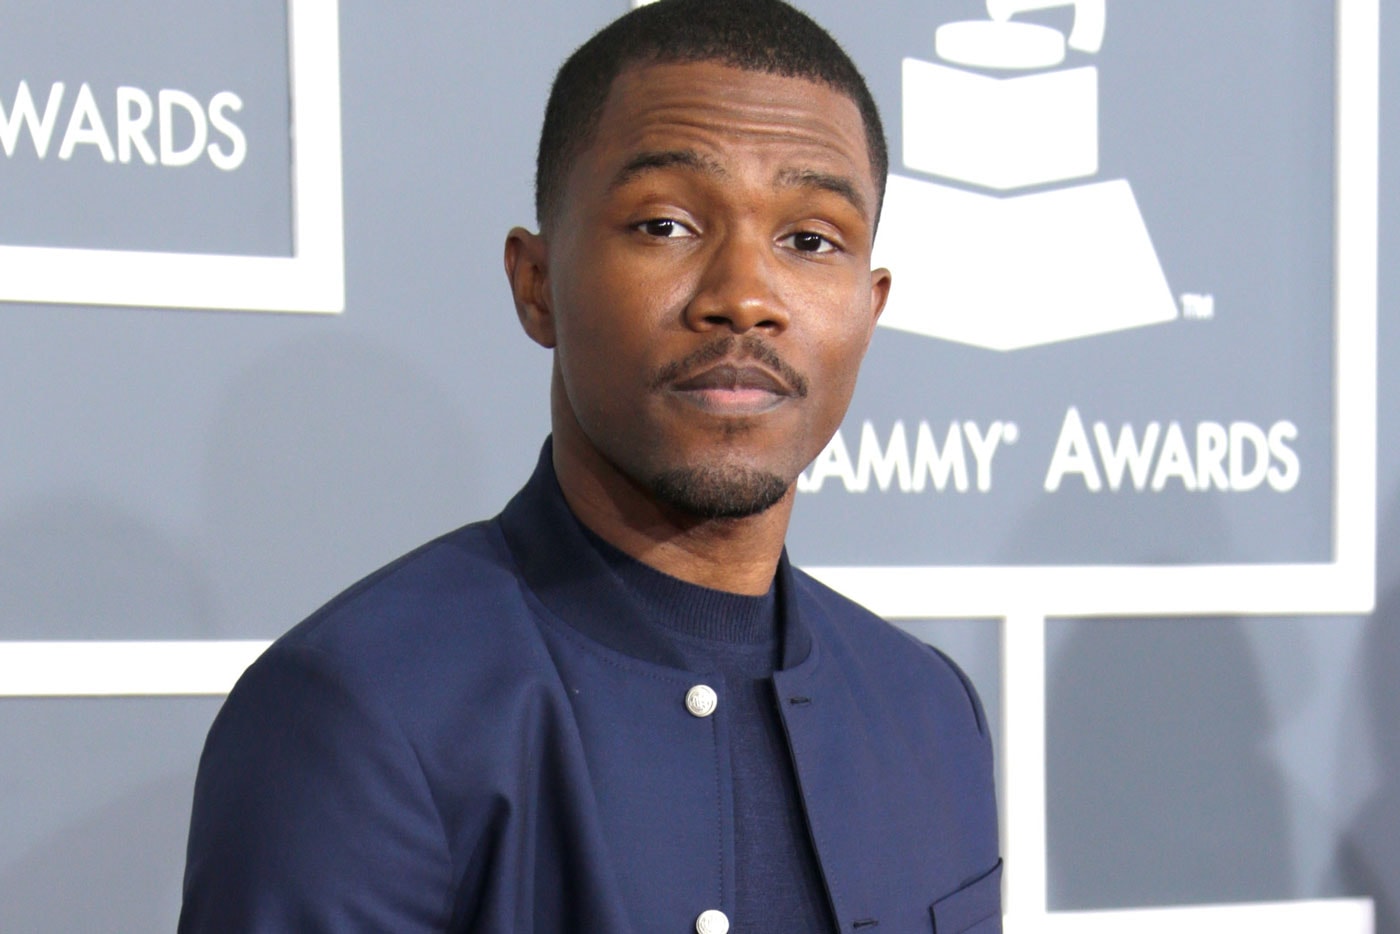 A Music Legend Speaks on Being Sampled by Frank Ocean